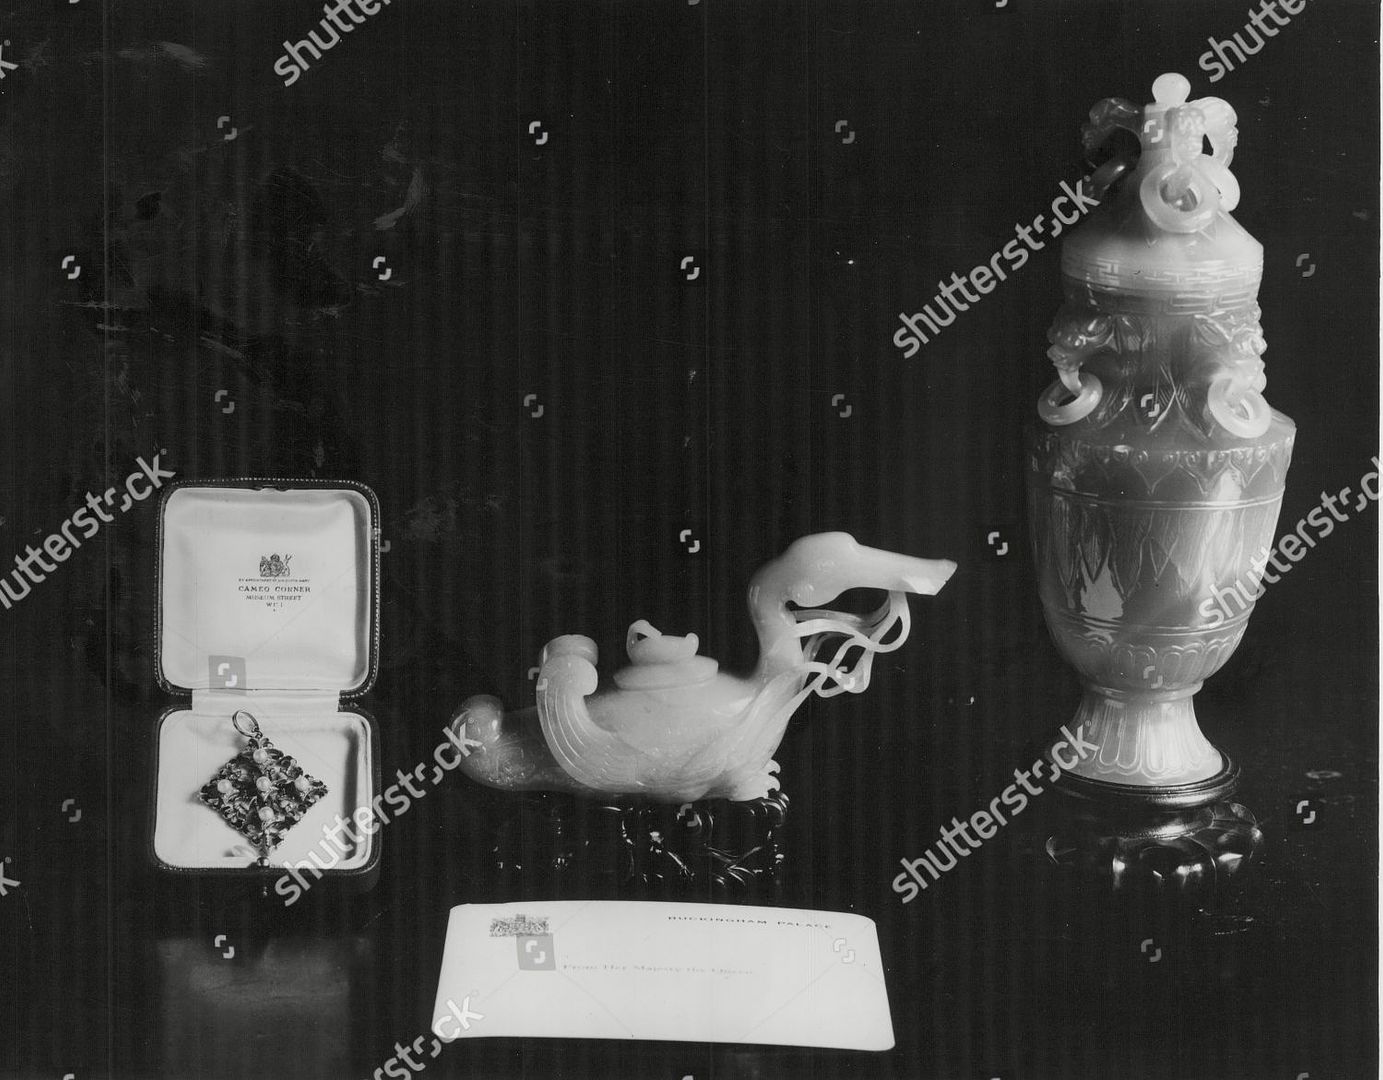 Spare a trinket fund but dated 7 July 1940 northcliffe-collection-wwii-shutterstock-editorial-10385765a